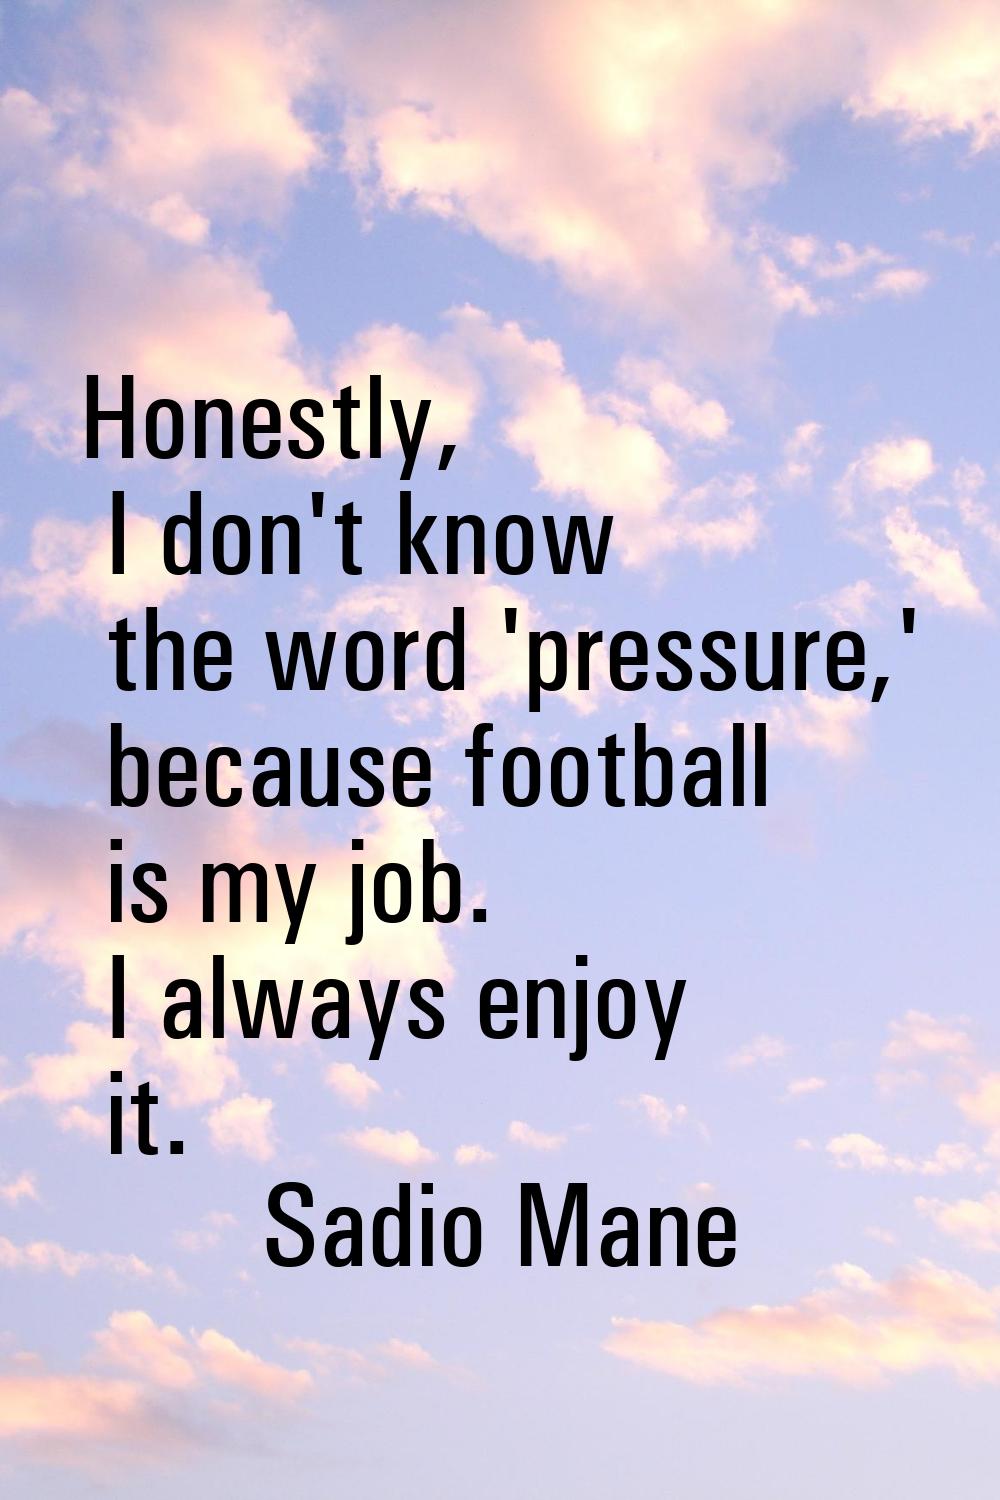 Honestly, I don't know the word 'pressure,' because football is my job. I always enjoy it.